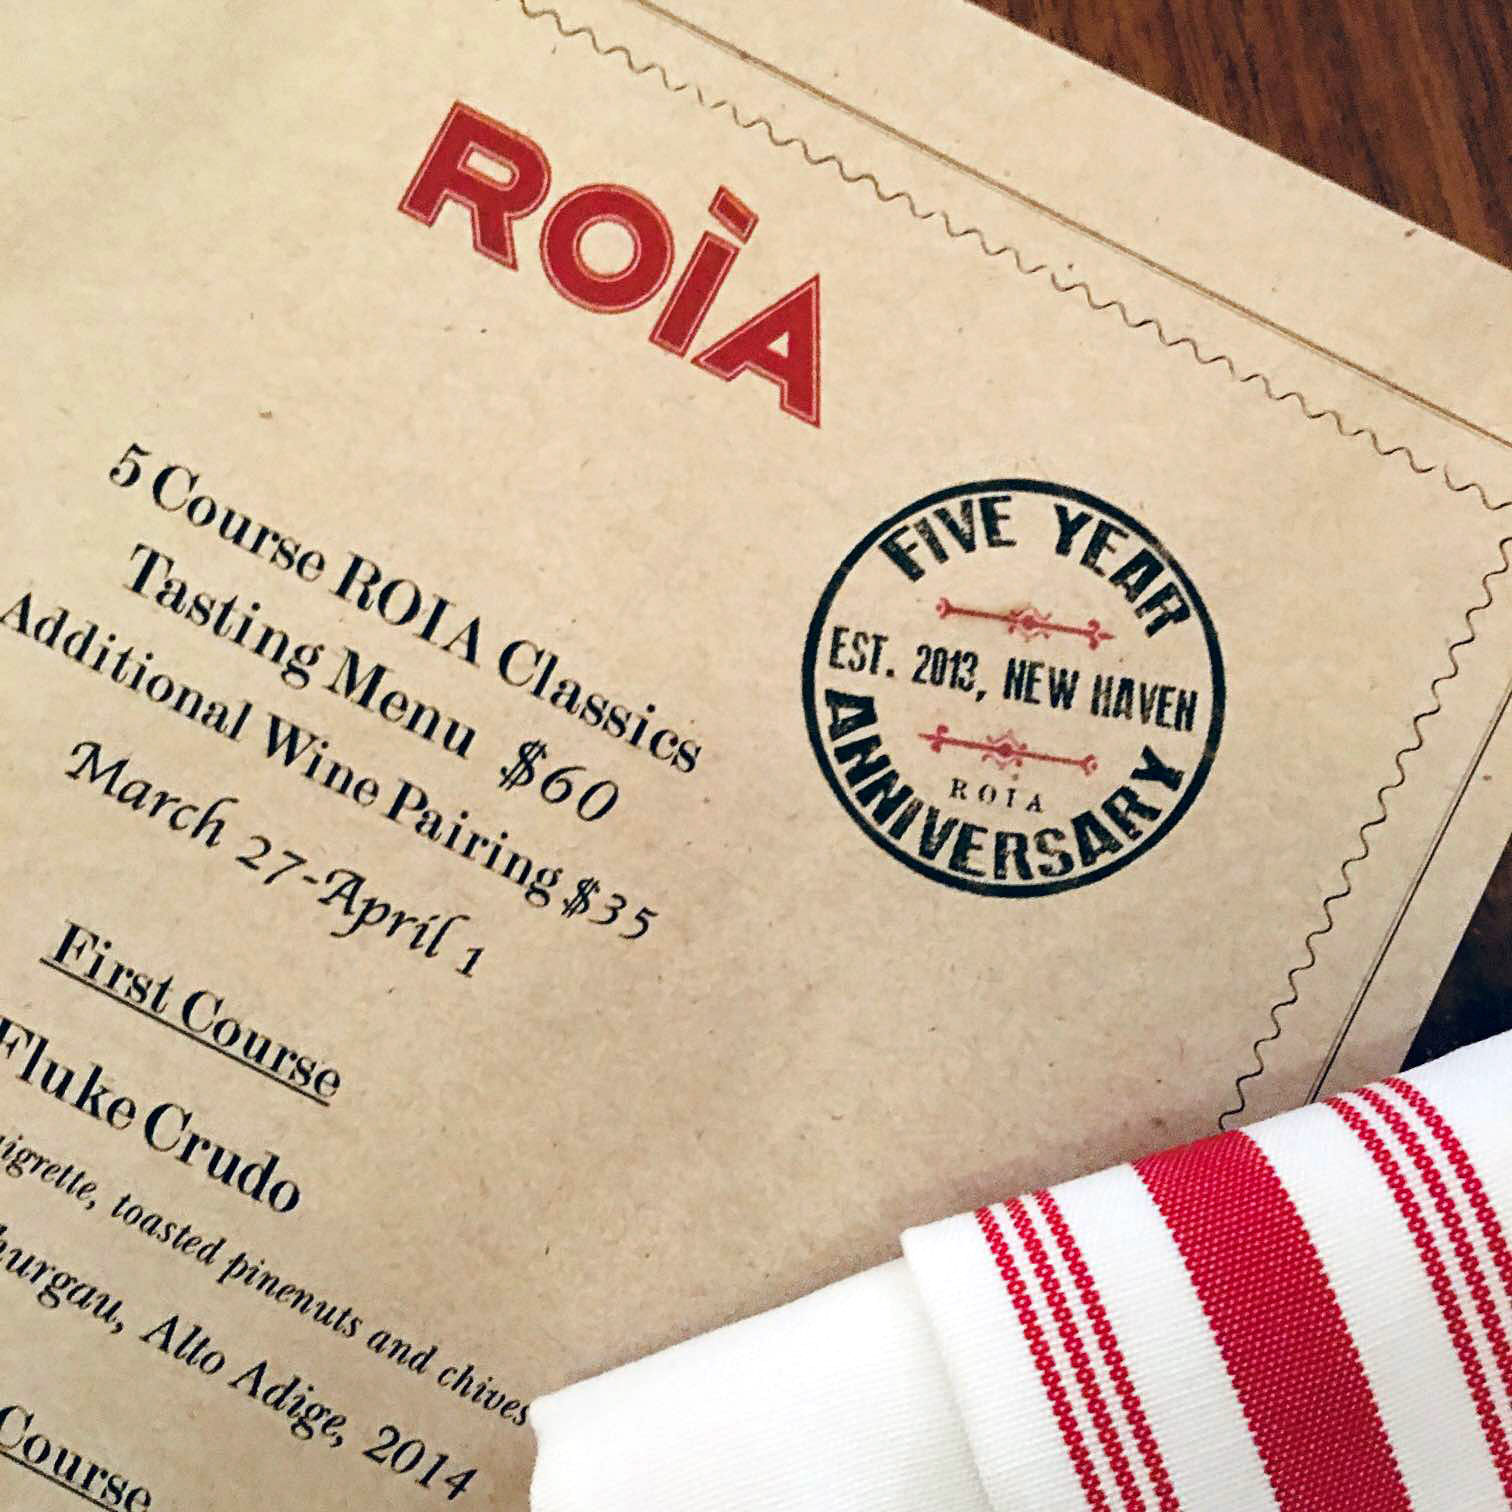 ROIA Restaurant New Haven is Celebrating Its Five Year Anniversary